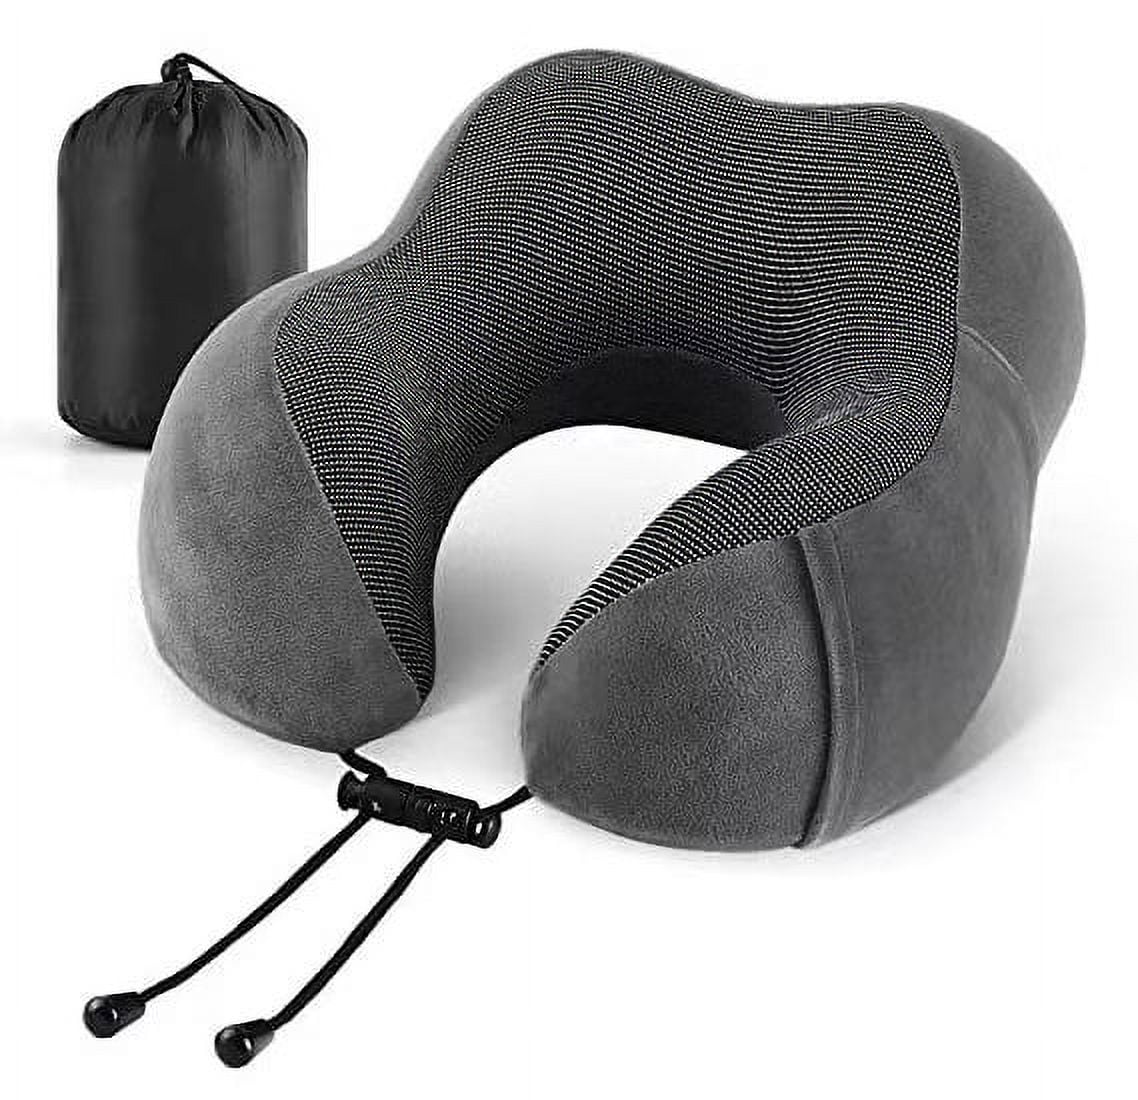 Head Support Cushion - Grey Padded Winged Neck Pillow with